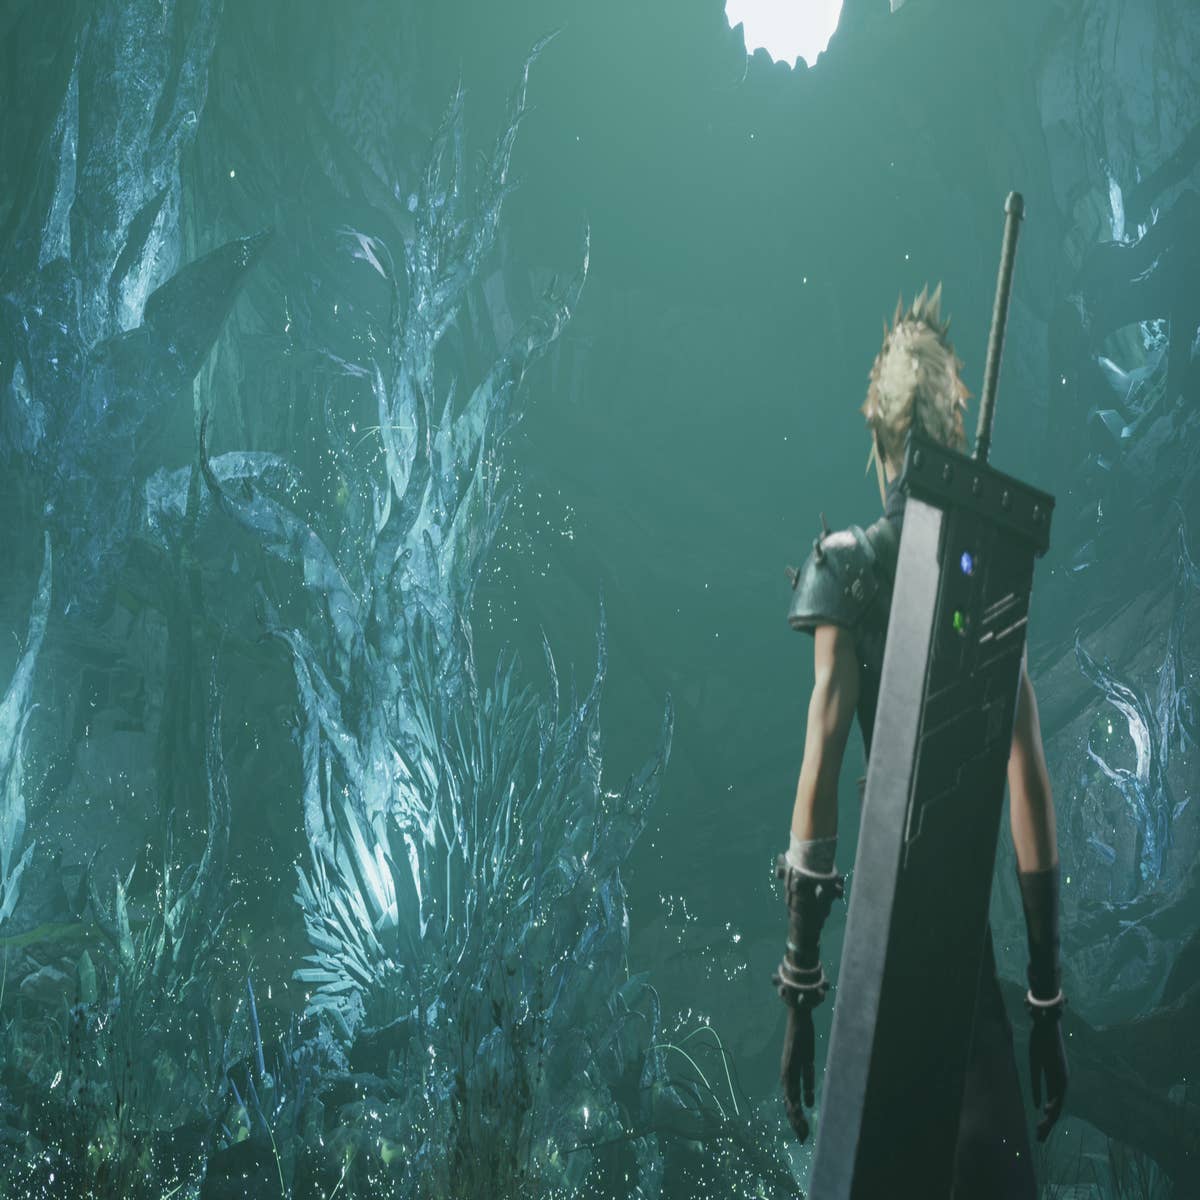 Relive Final Fantasy VII in a whole new way